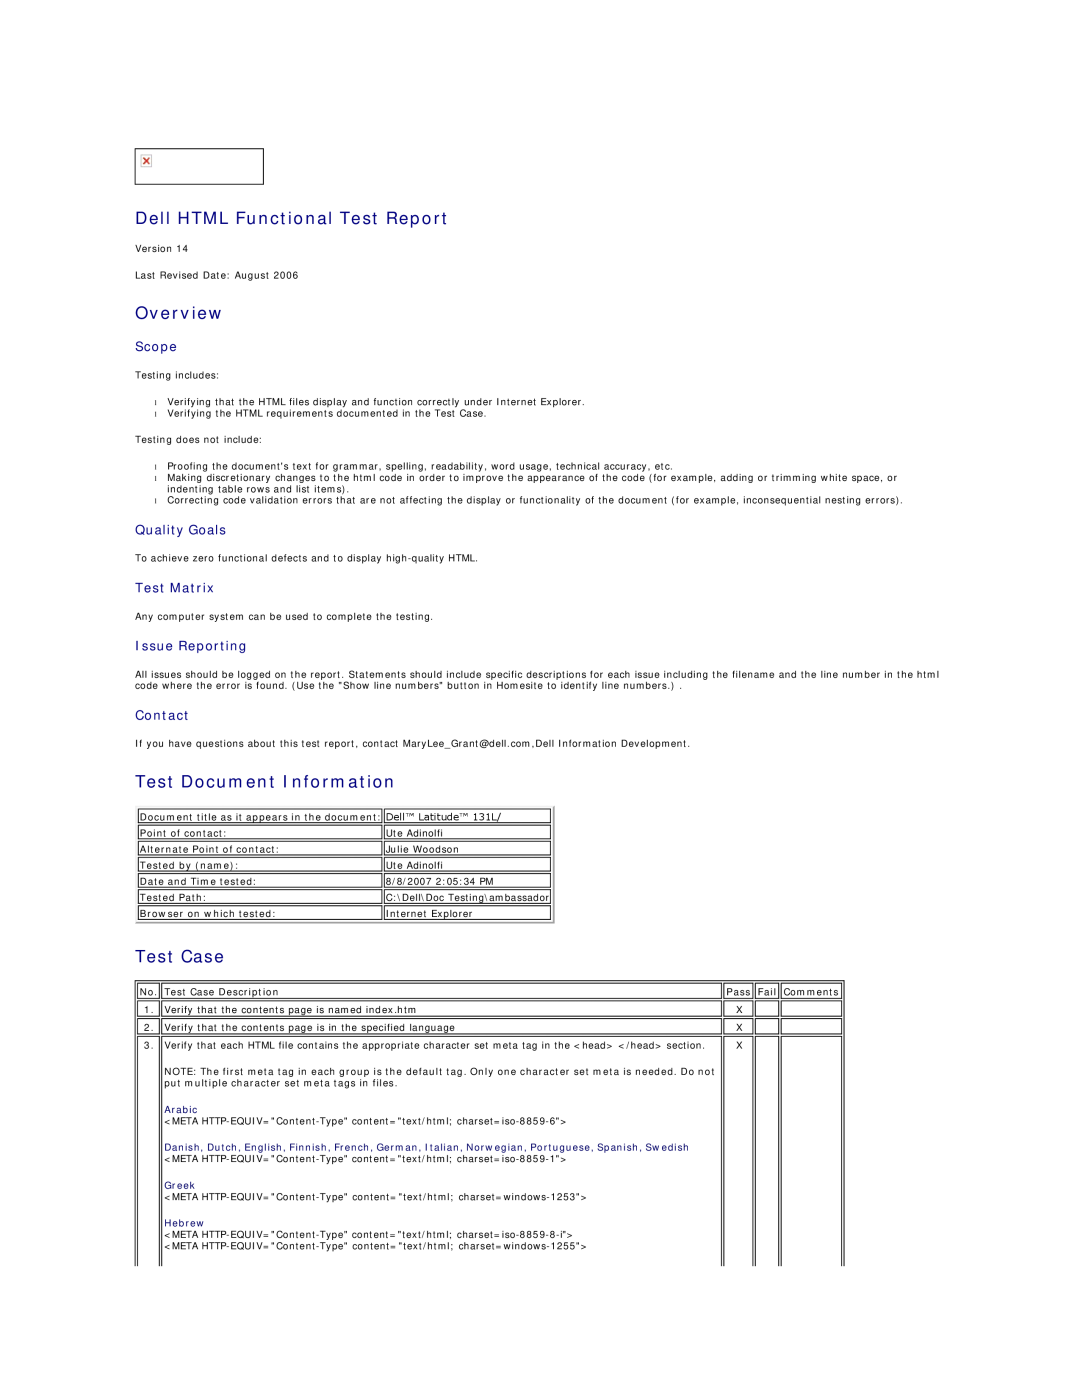 Dell 131L Dell HTML Functional Test Report, Overview, Test Document Information, Test Case, Point of contact, Ute Adinolfi 